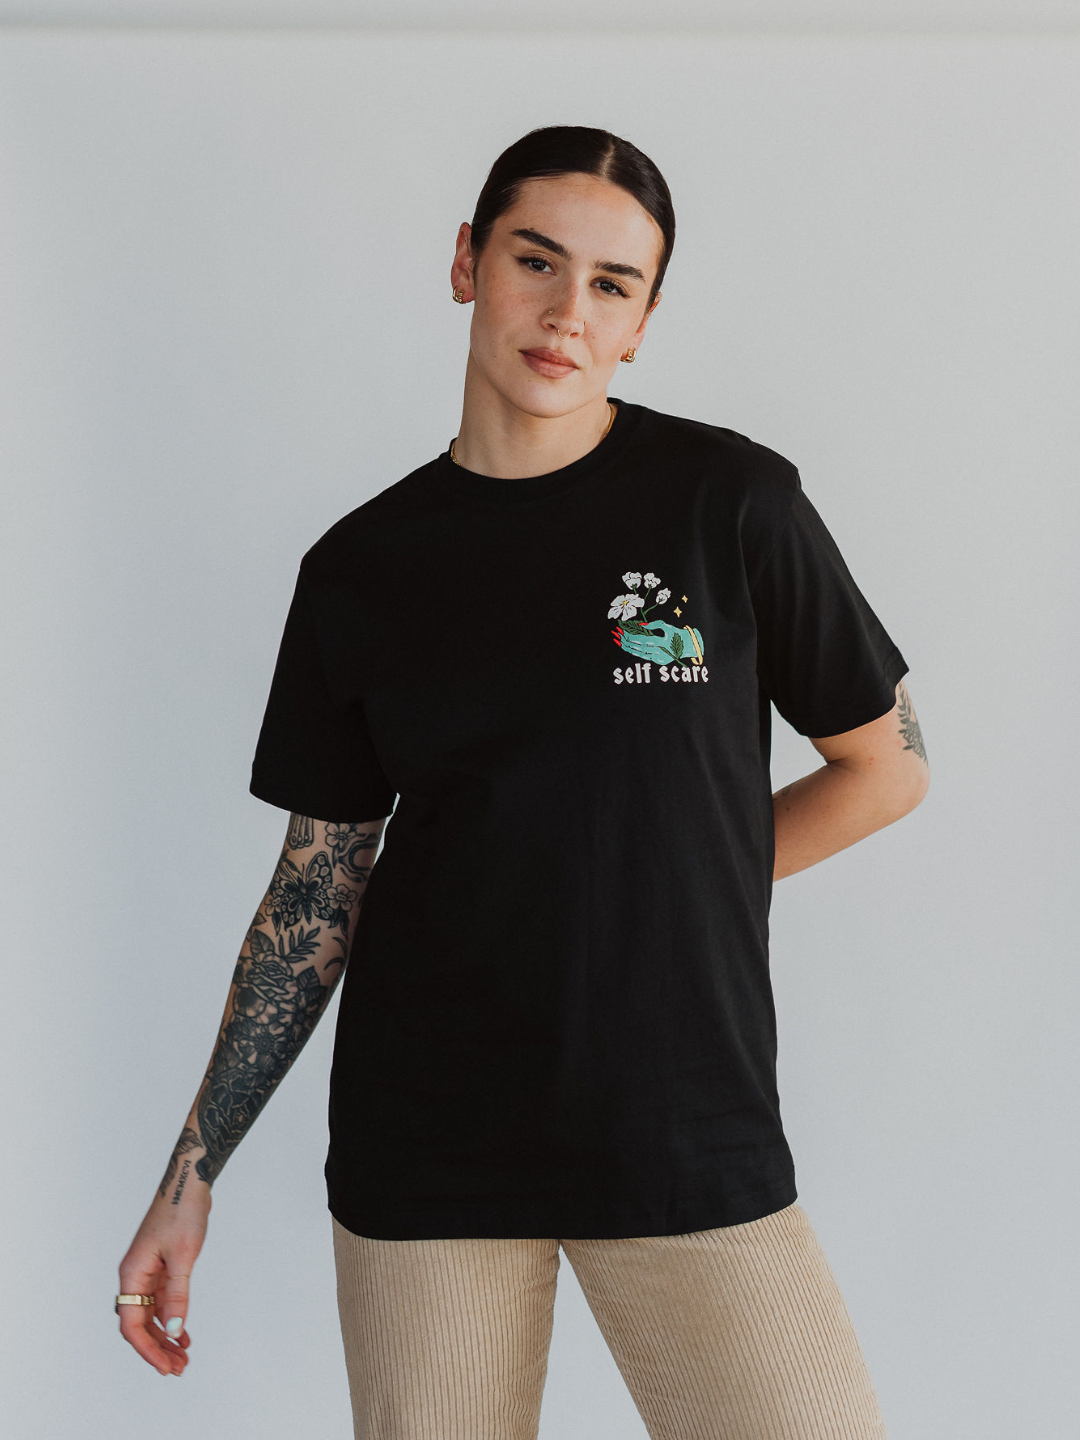 Self Scare T-Shirt - Octopied Mind